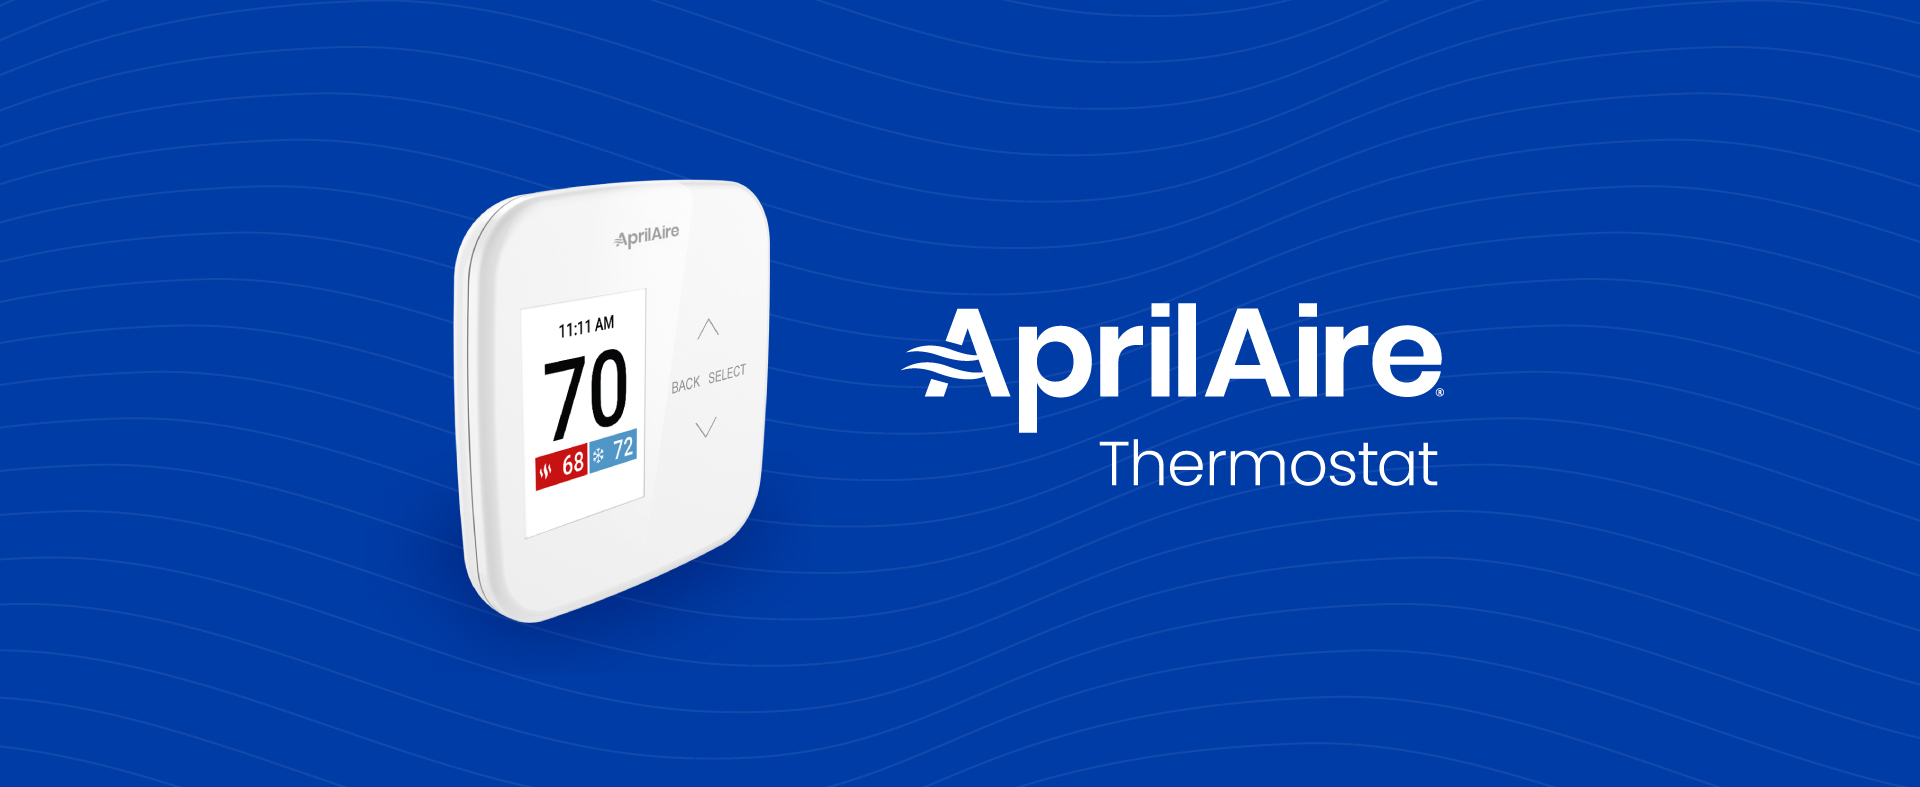 AprilAire Thermostats